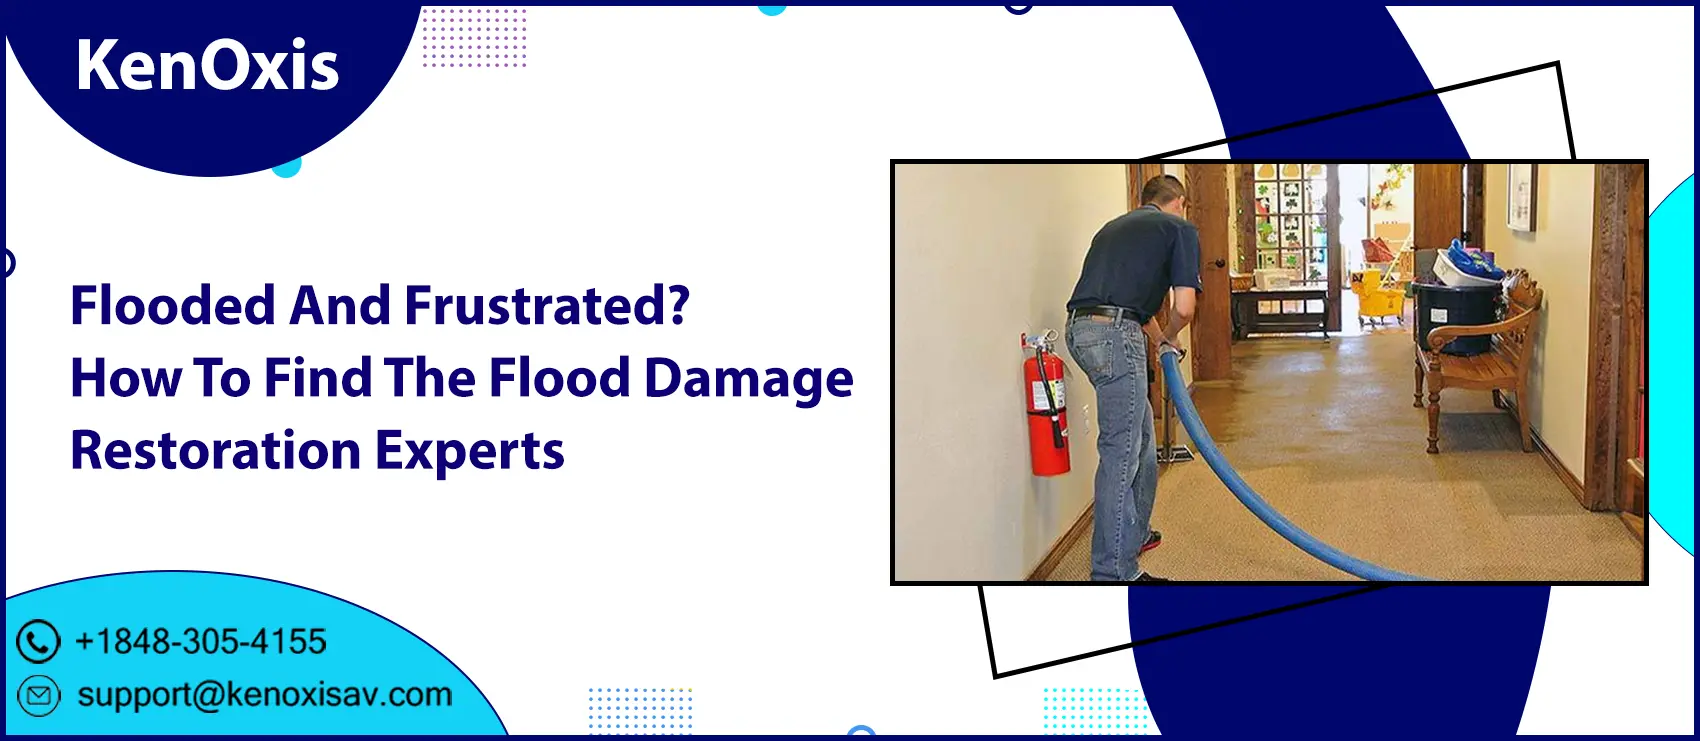 Flooded And Frustrated? How To Find The Flood Damage Restoration Experts